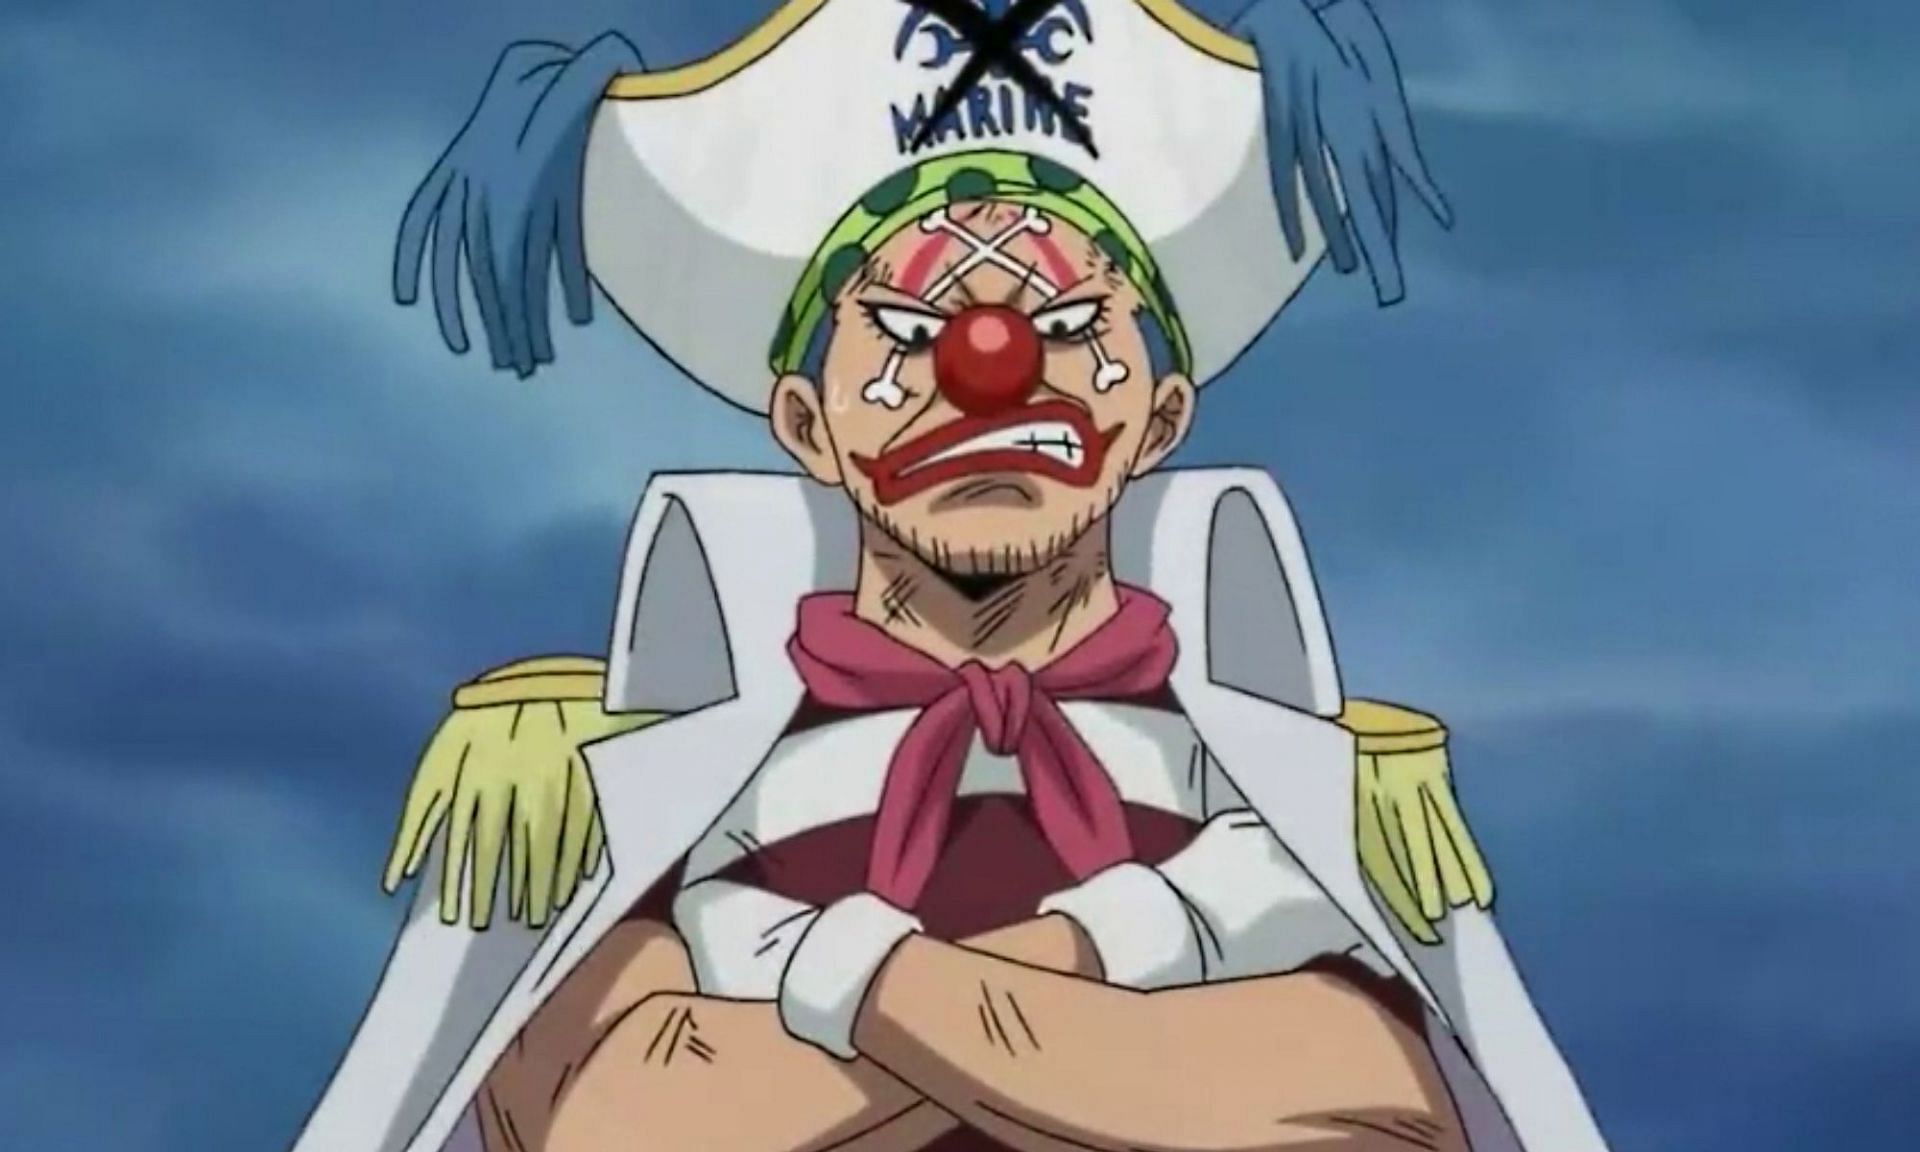 Buggy the Clown never ceases to amaze